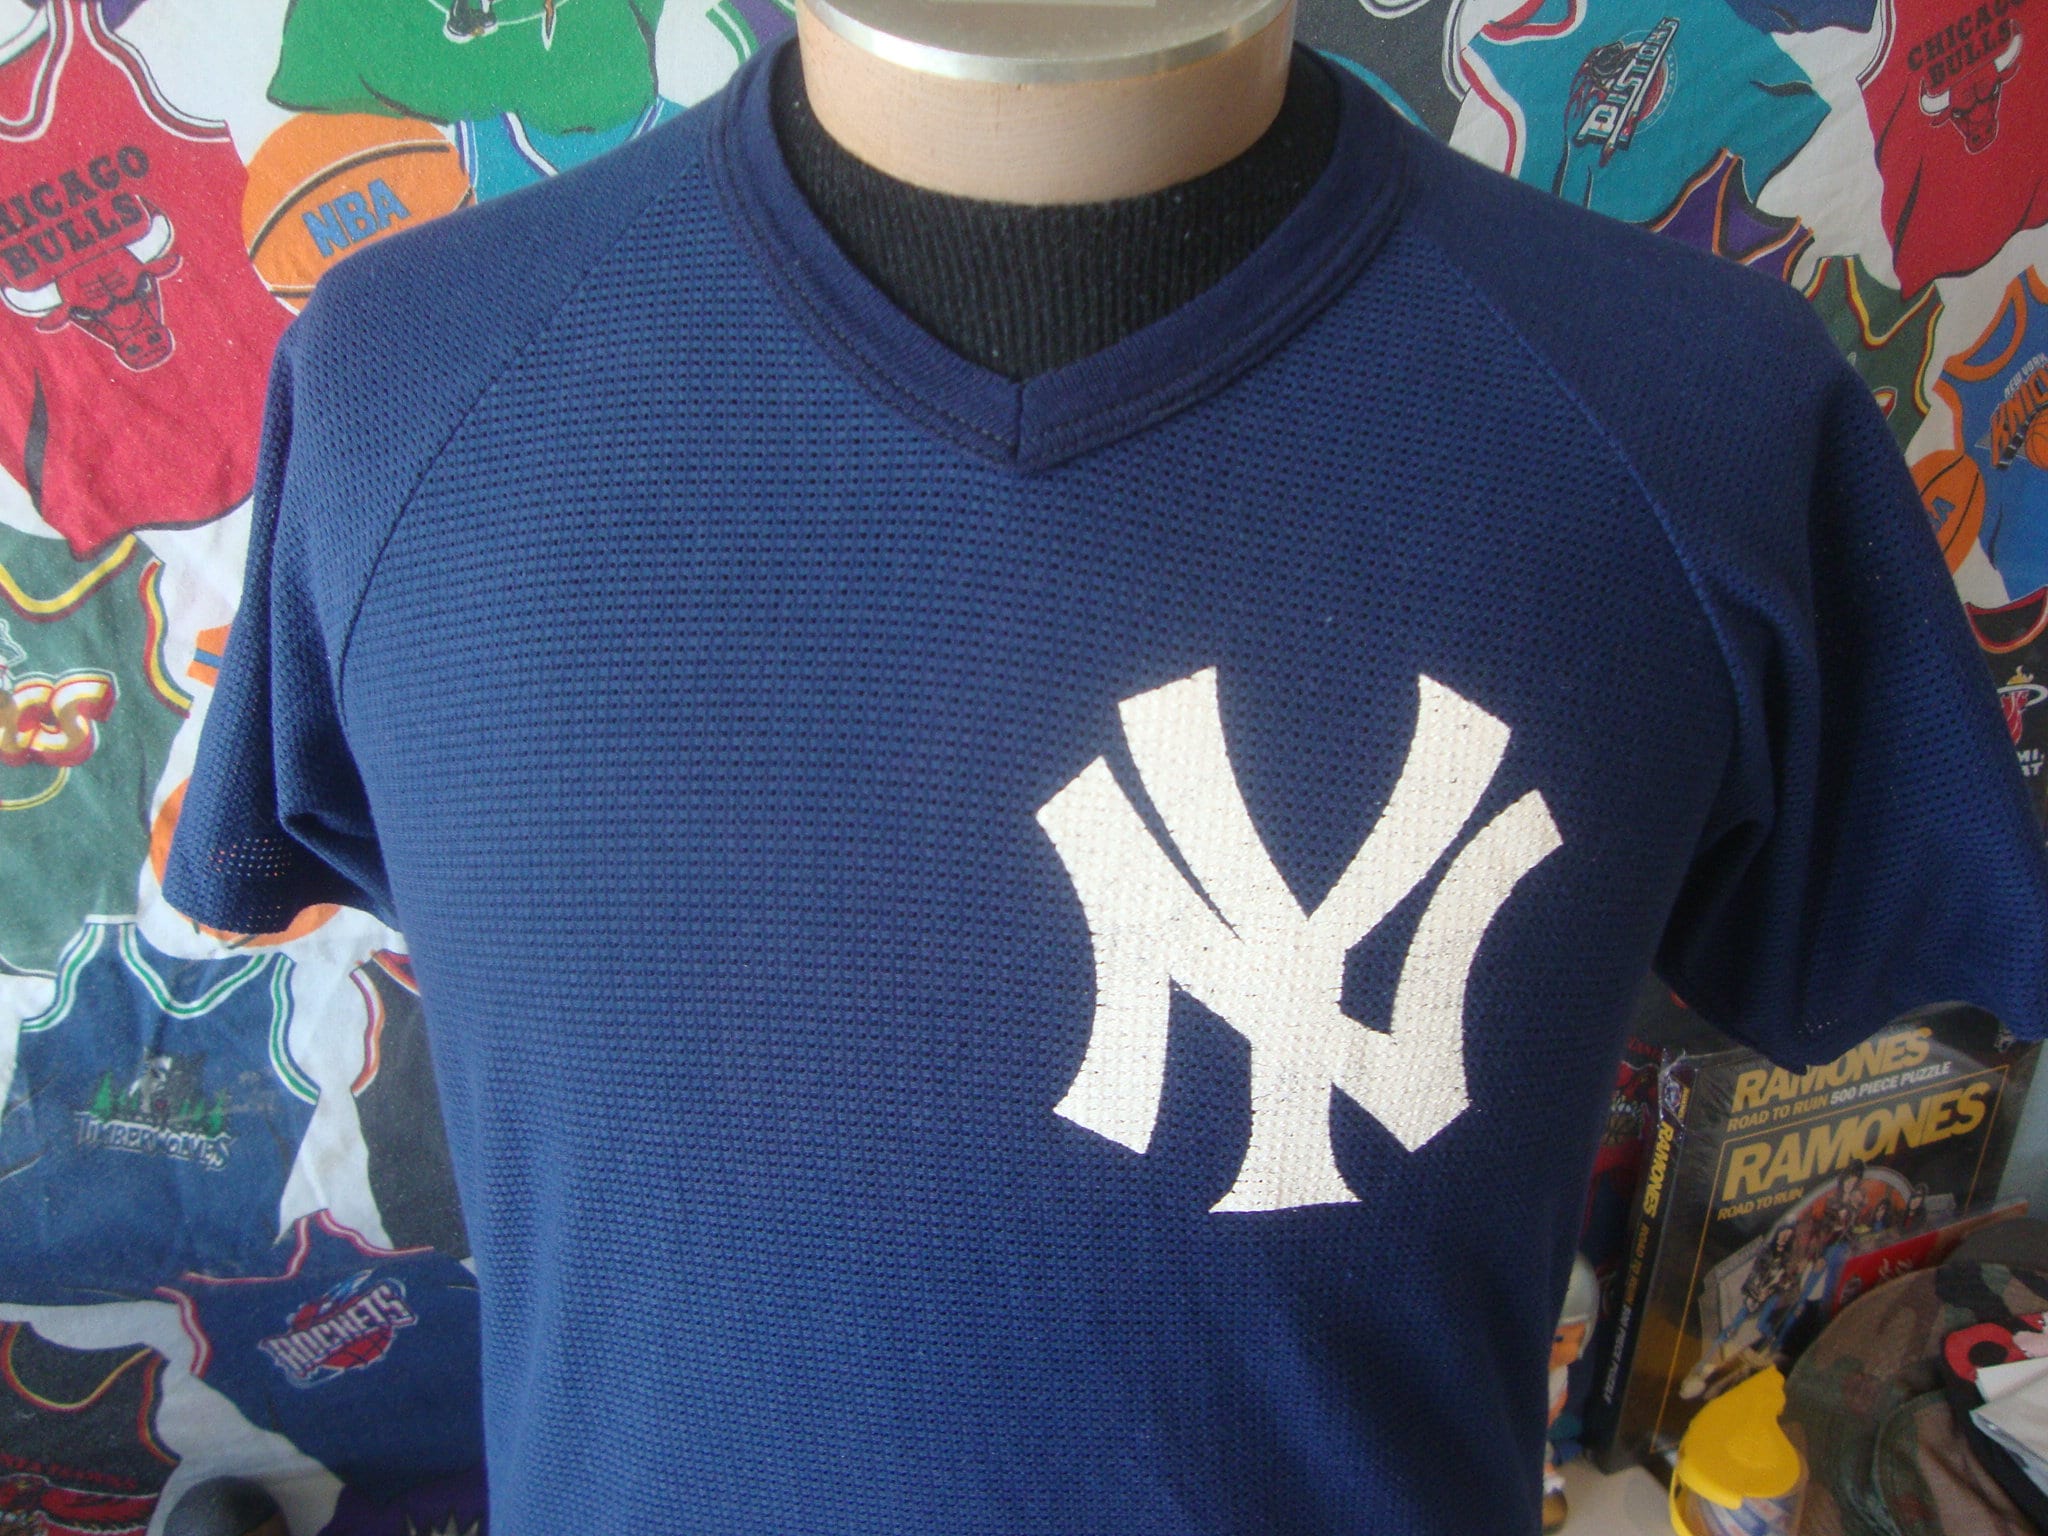 Men's New York Yankees Majestic Mickey Mantle Road Player Jersey